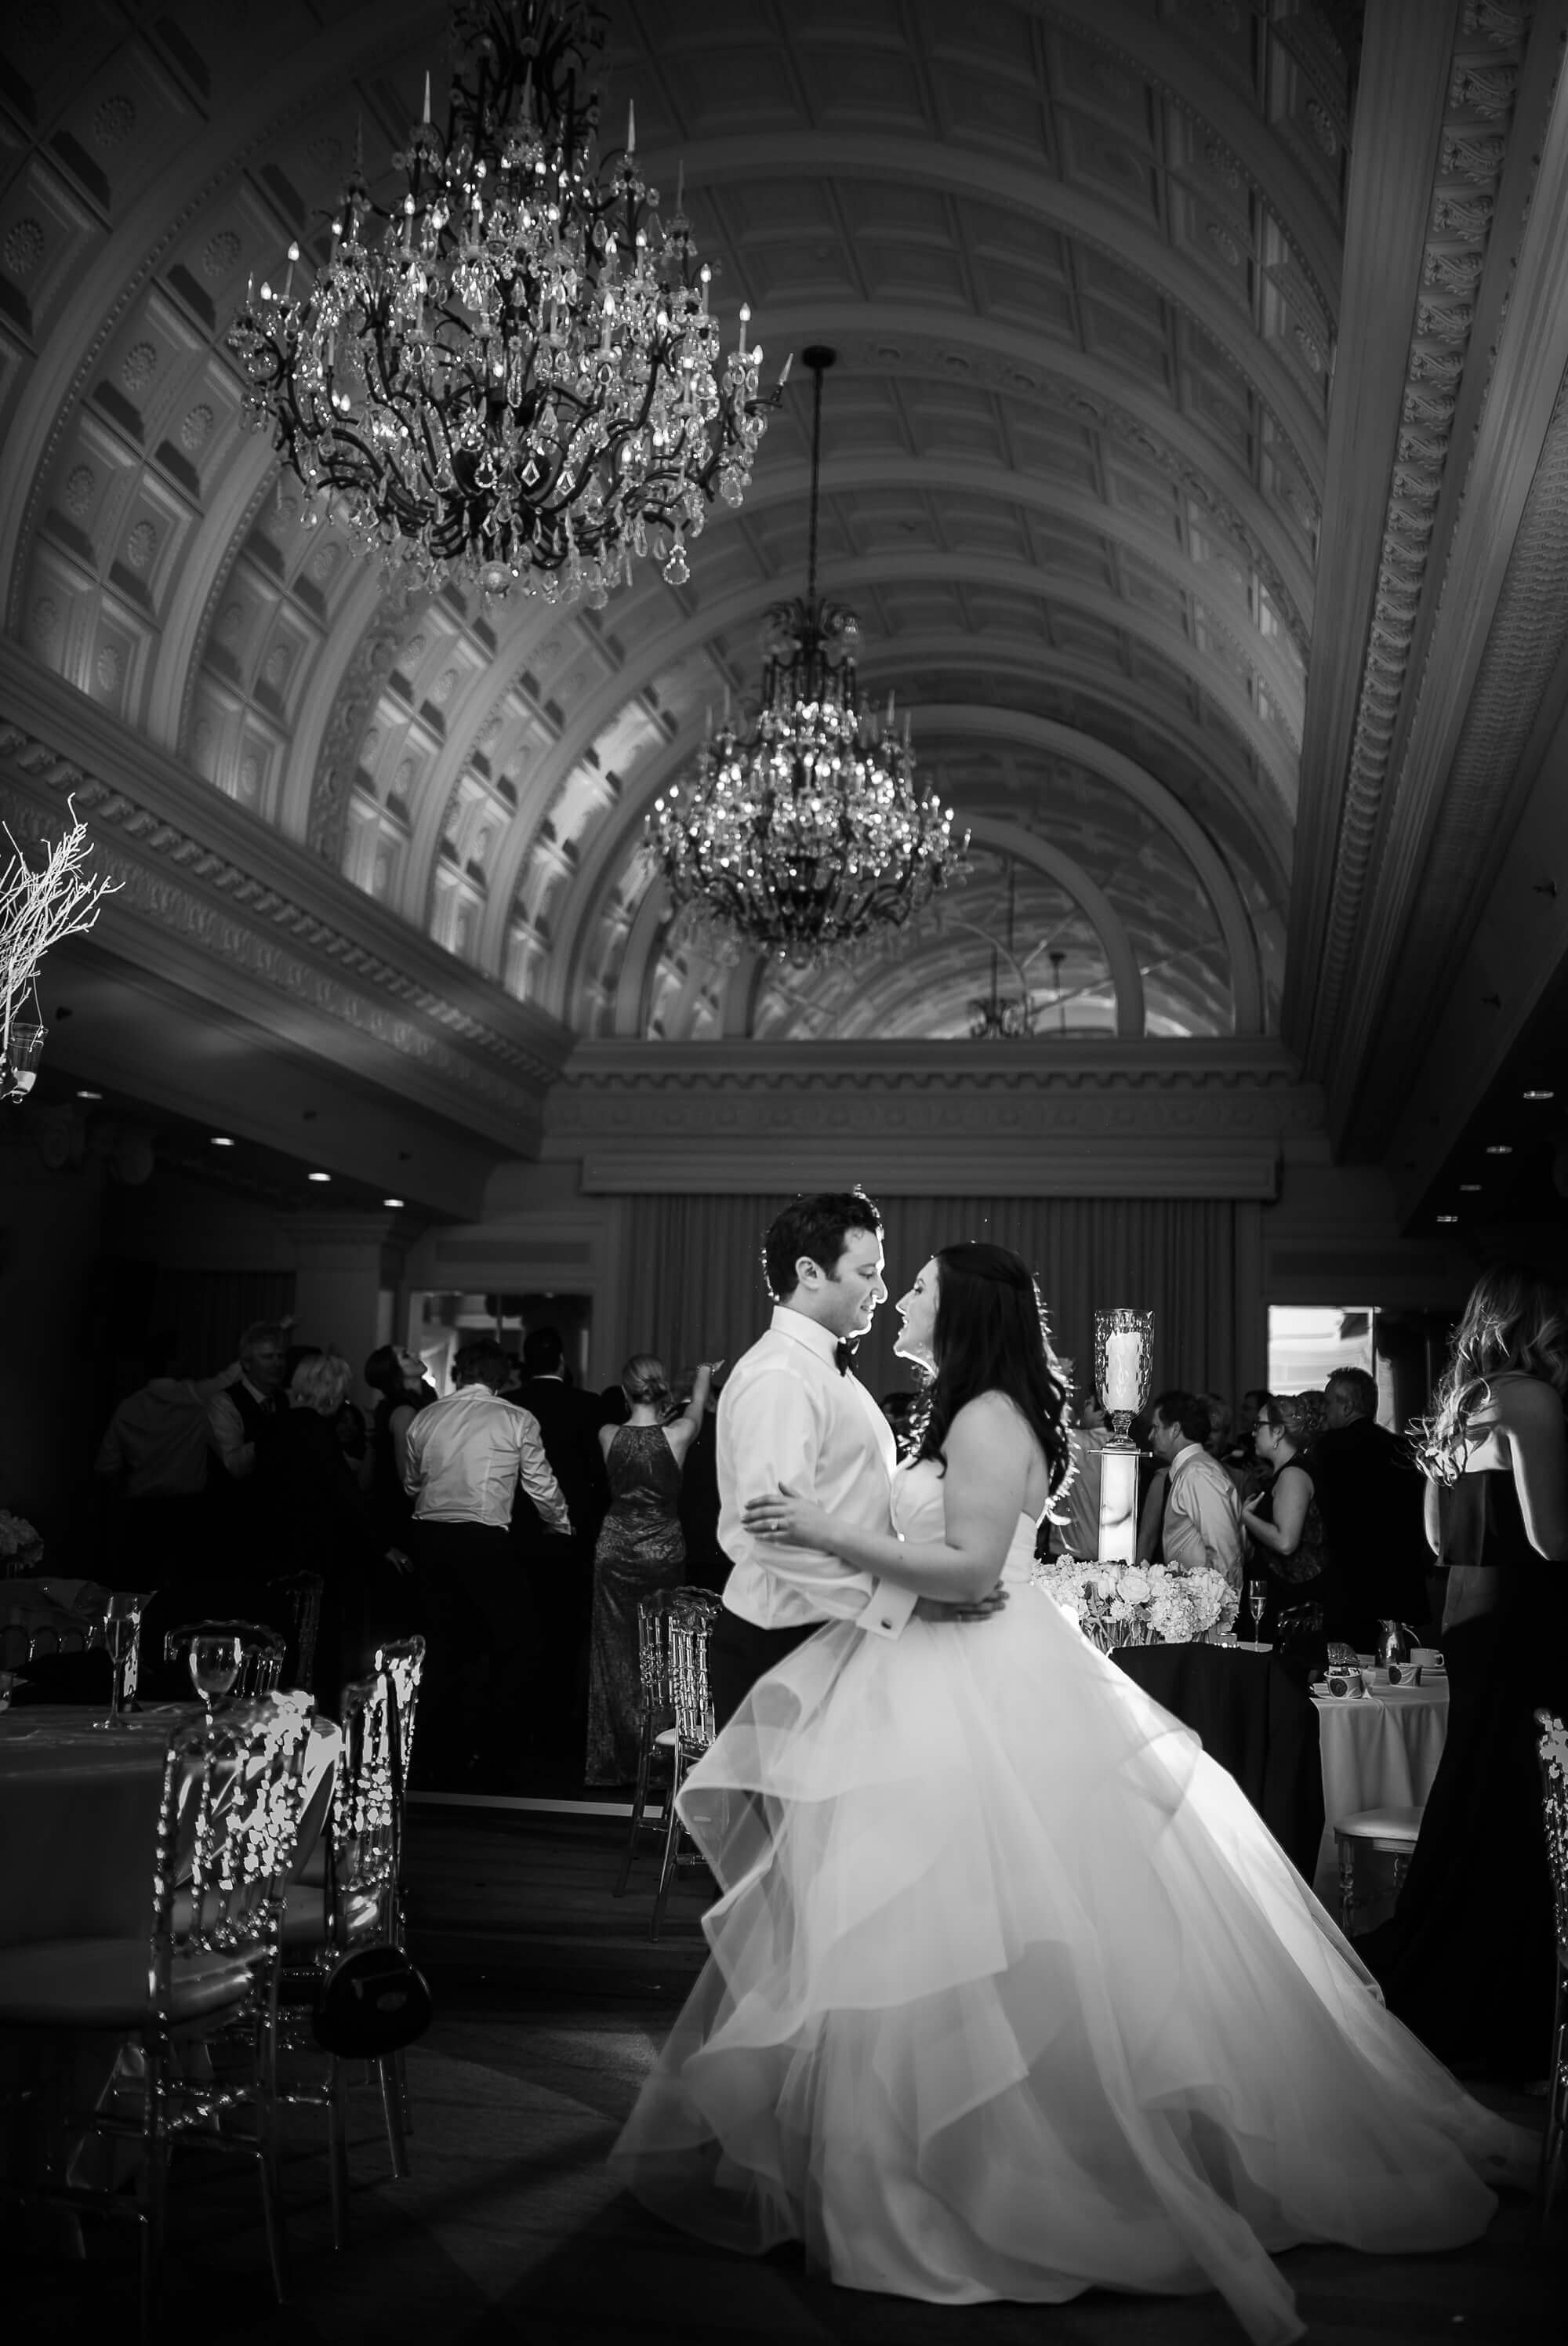 Luminous black and white portrait of the bride and groom dancing underneath the chandeliers at the Omni King Edward Hotel in Toronto